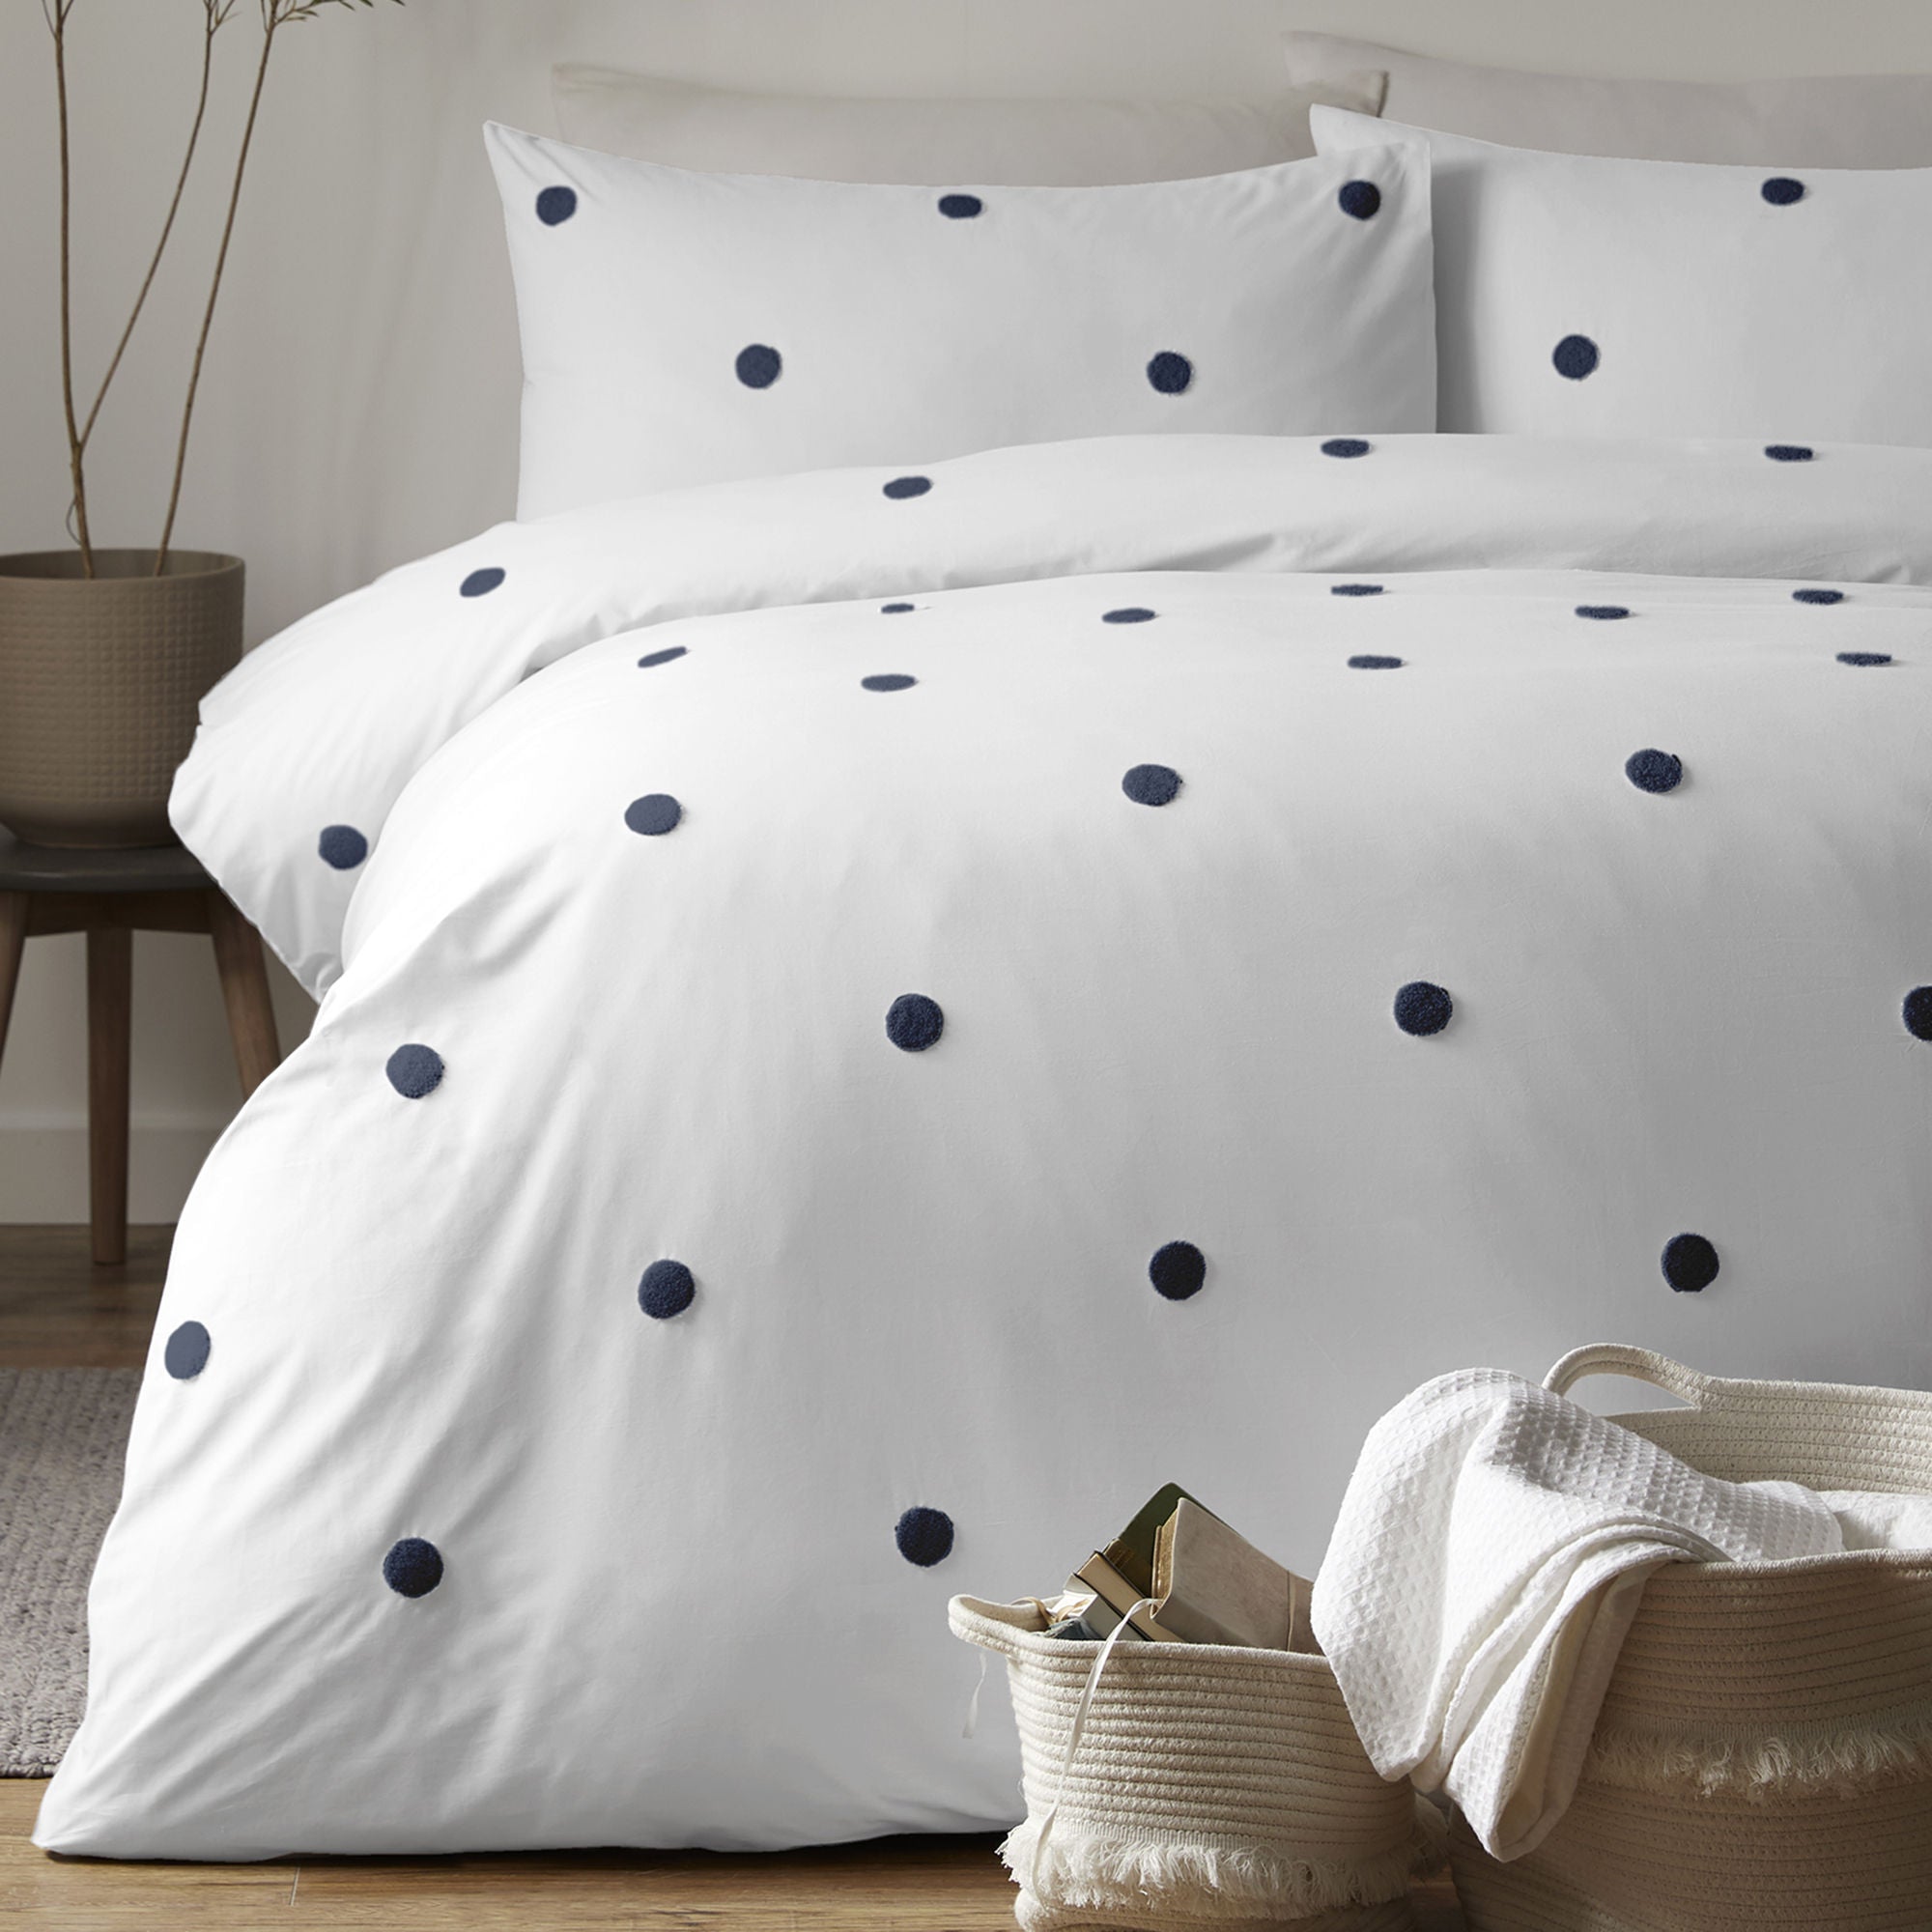 Dot Garden Duvet Cover Set by Appletree Boutique in White with Navy Dots - Duvet Cover Set - Appletree Boutique